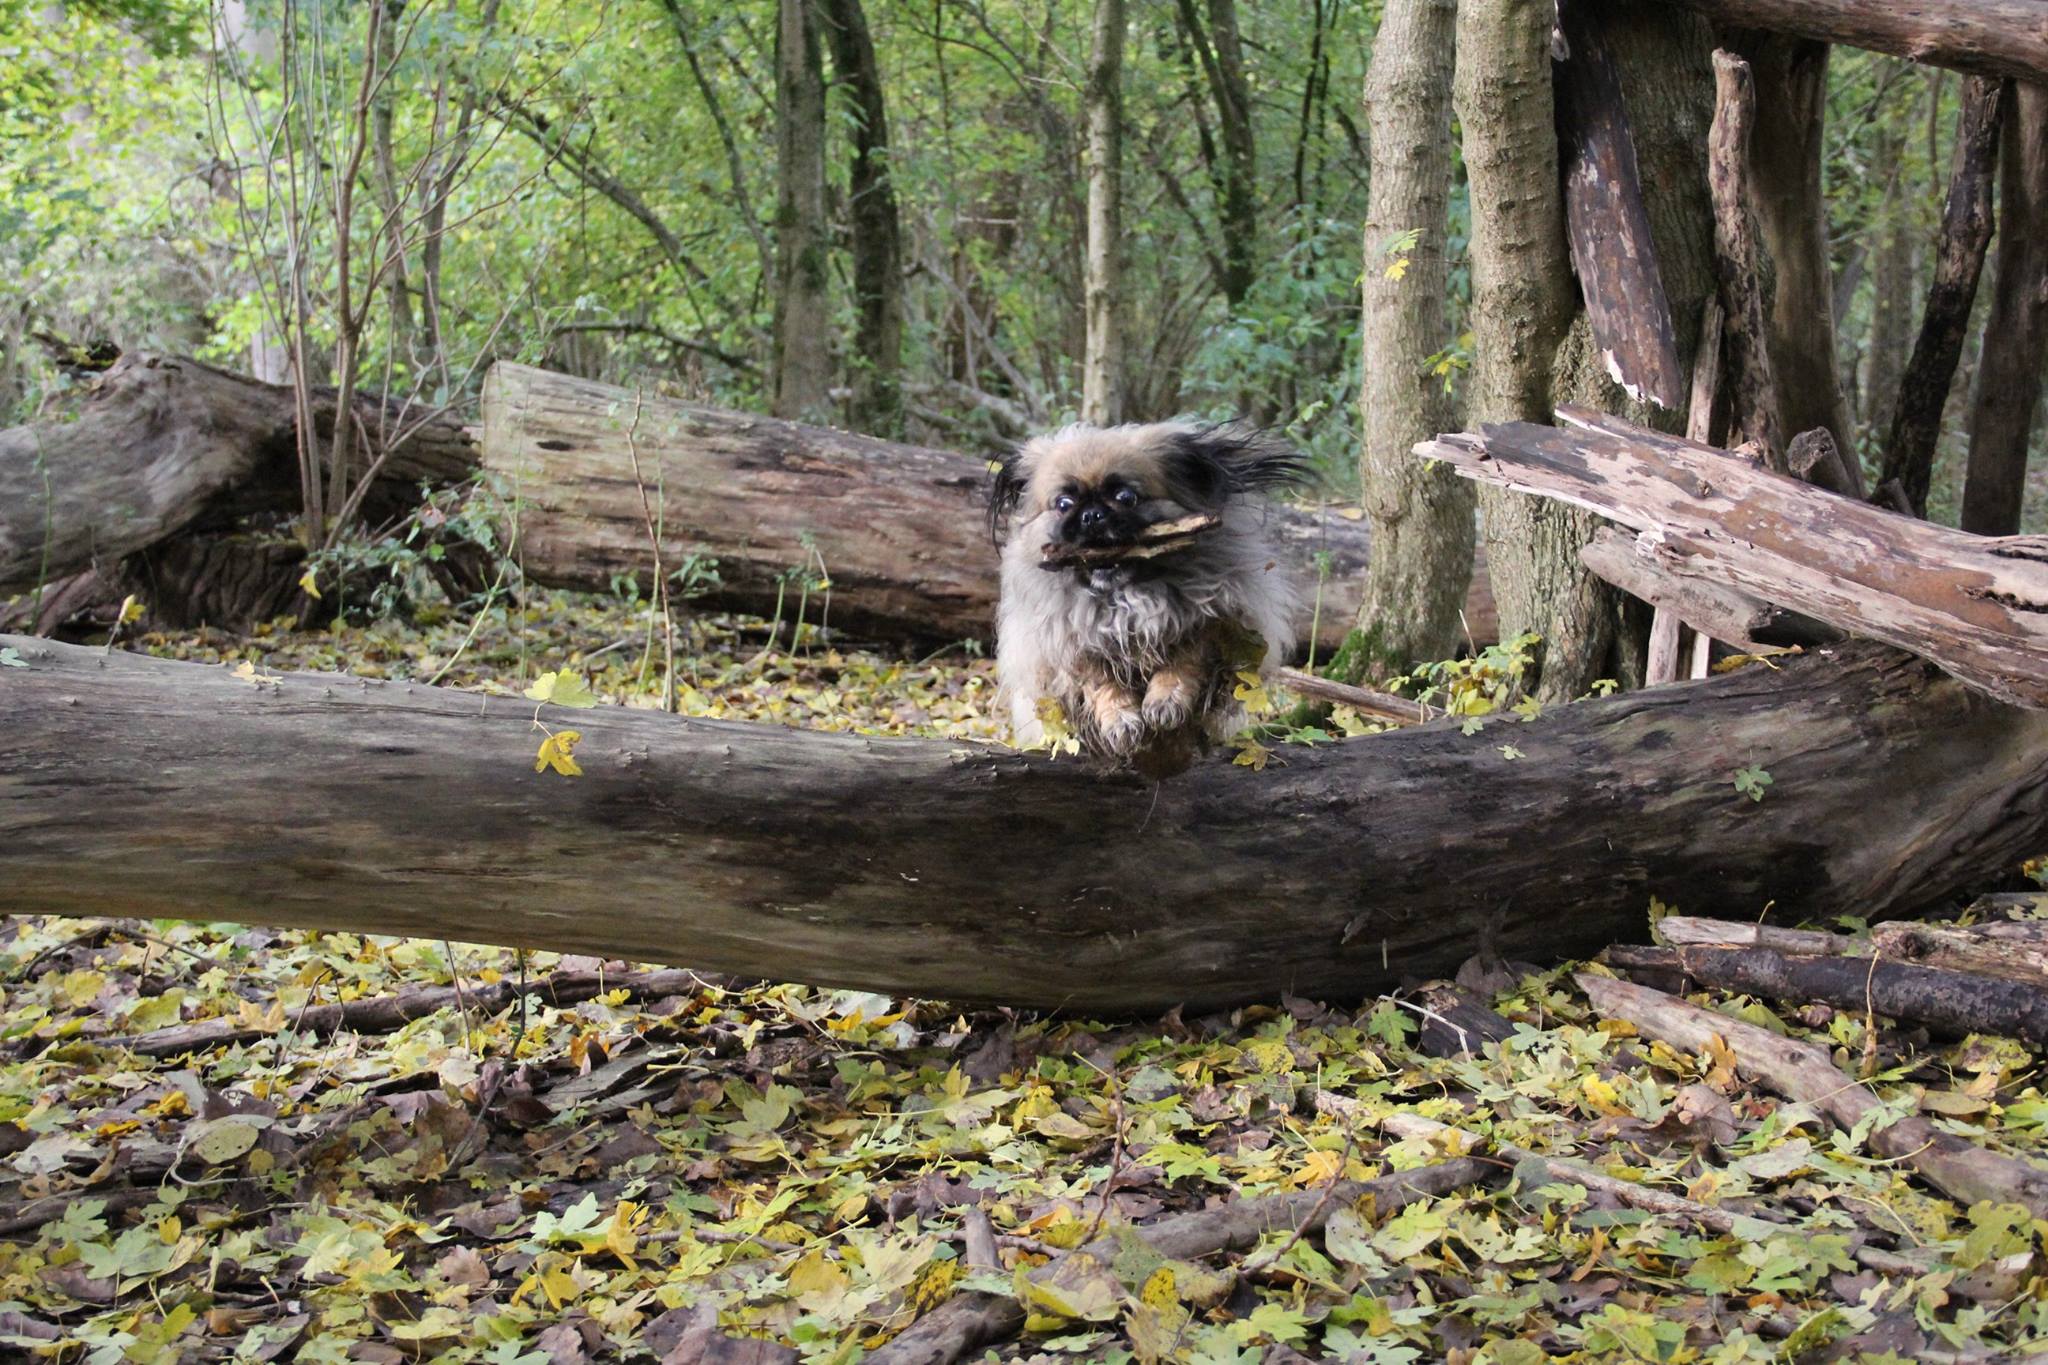 A Pekingese jumping over the tree trunk laid on the ground in the forest